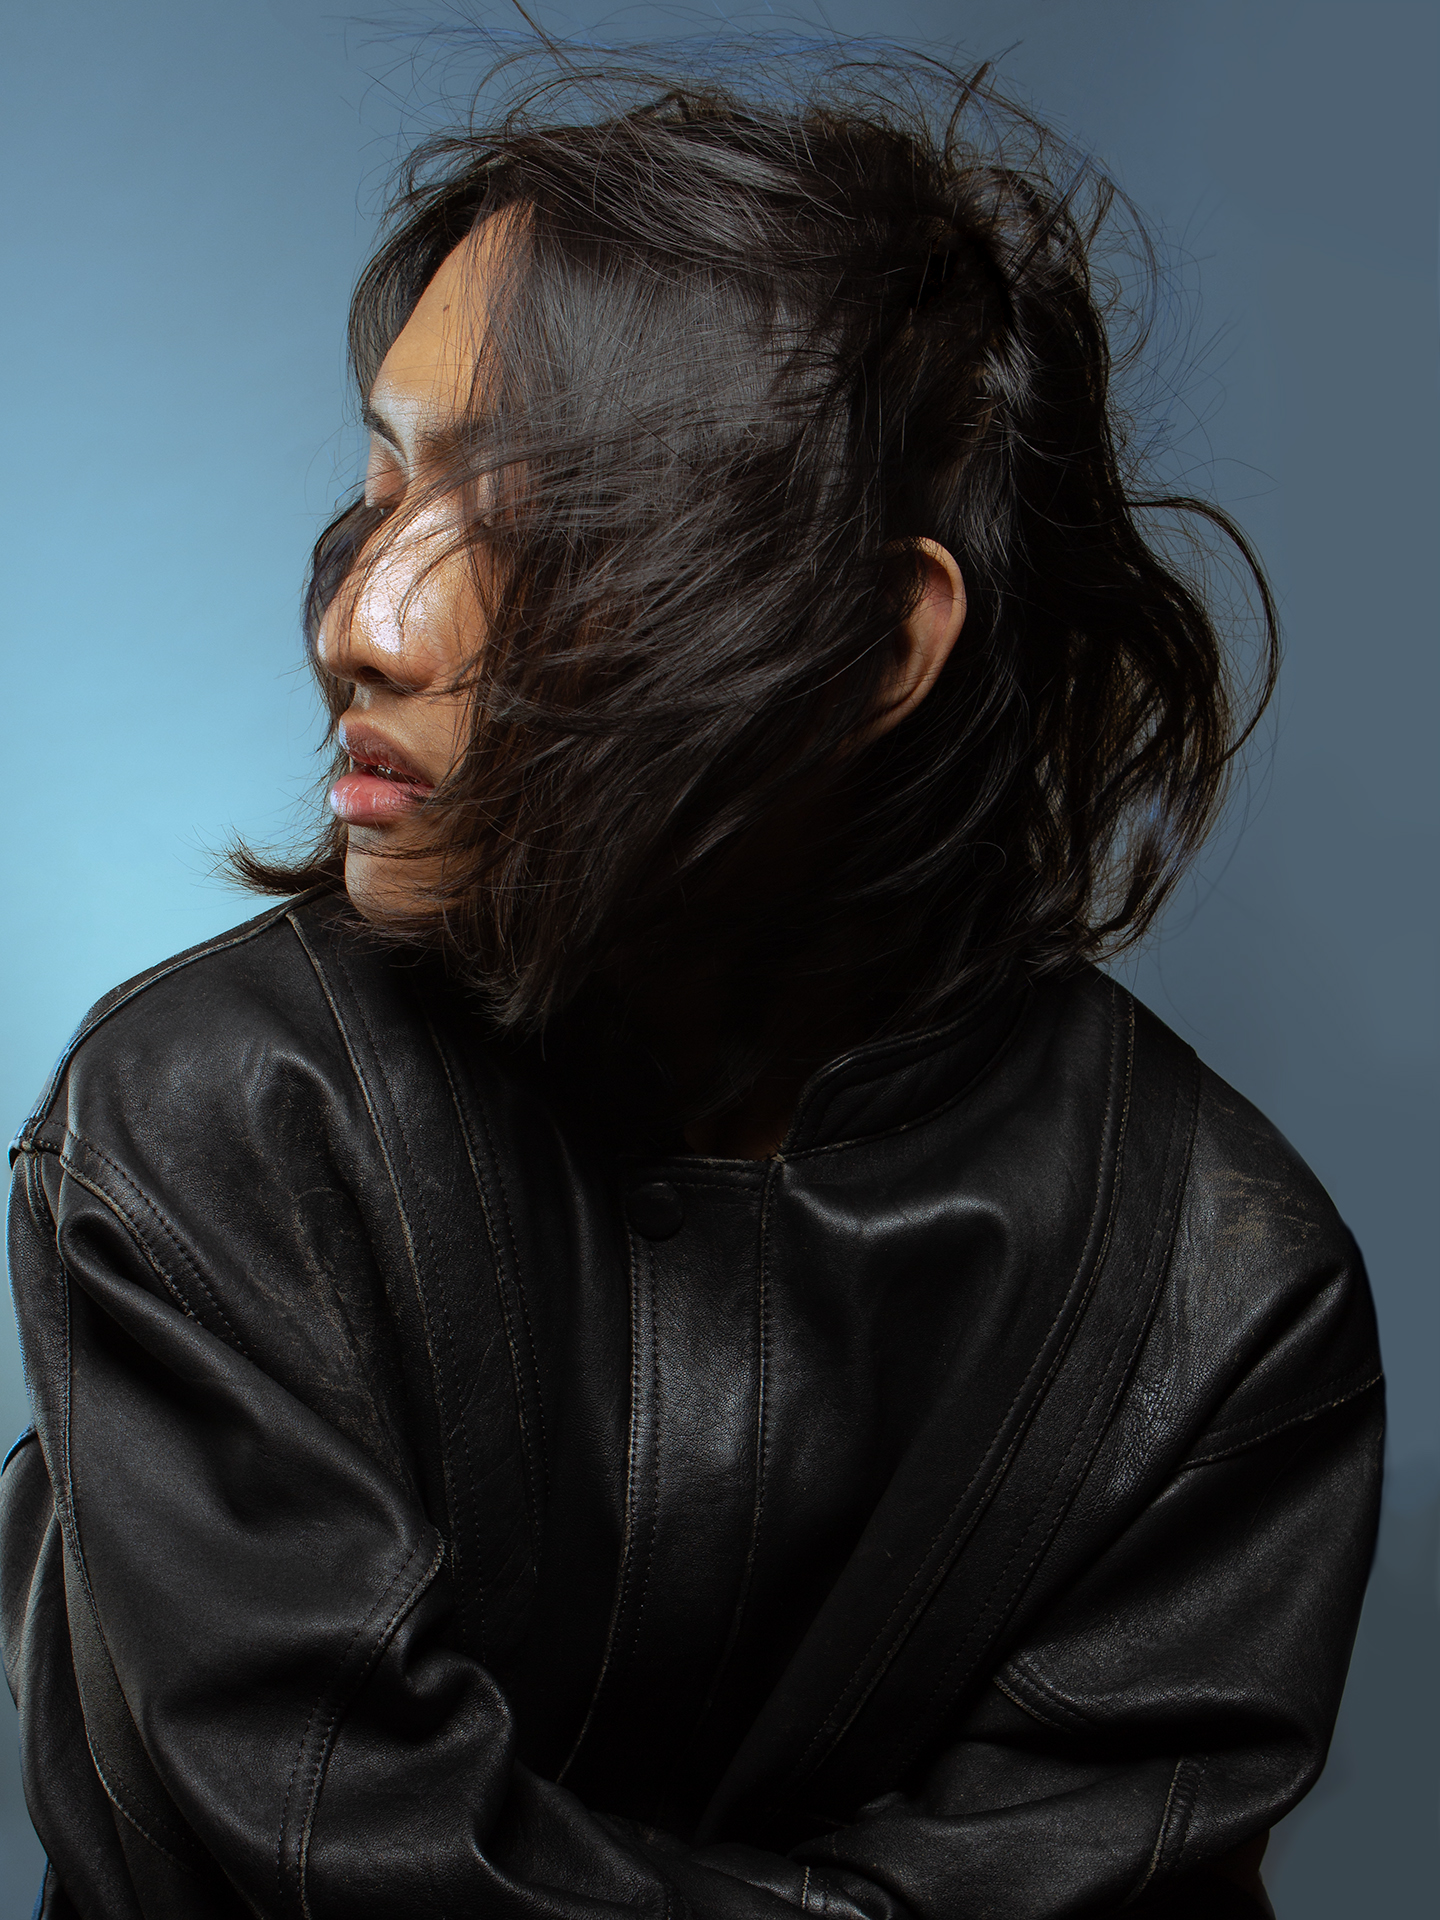 Sai The model, Sai, has their head turned to the left side of the image with their eyes closed, as their short black hair blows onto their face. Sai is styled in a black leather jacket against a blue backdrop.